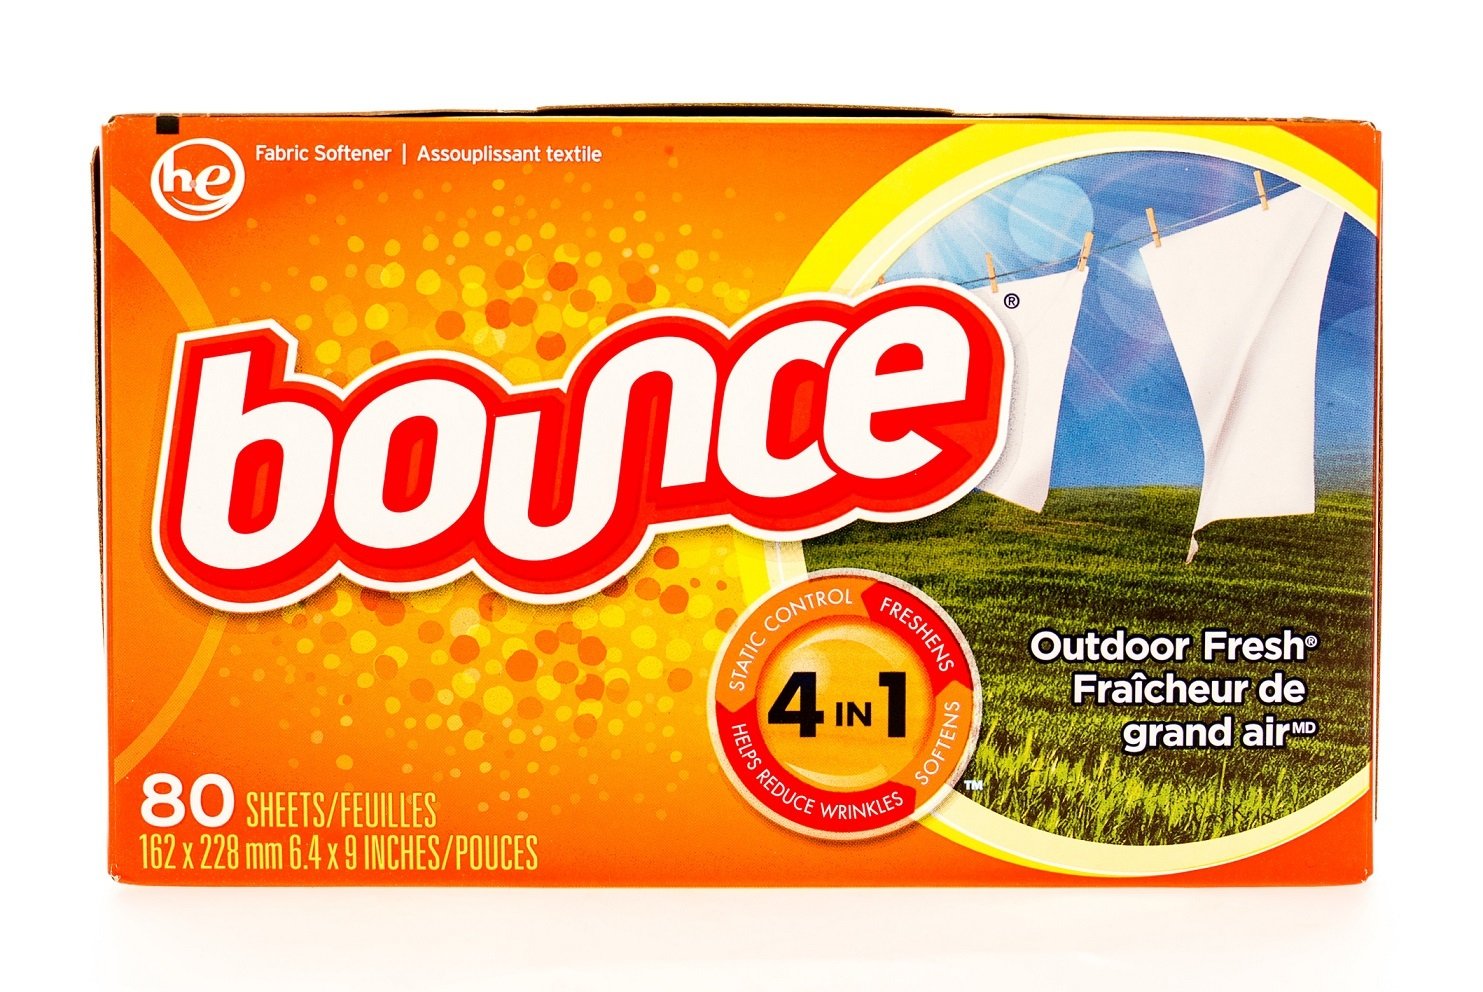 Bounce dryer sheets